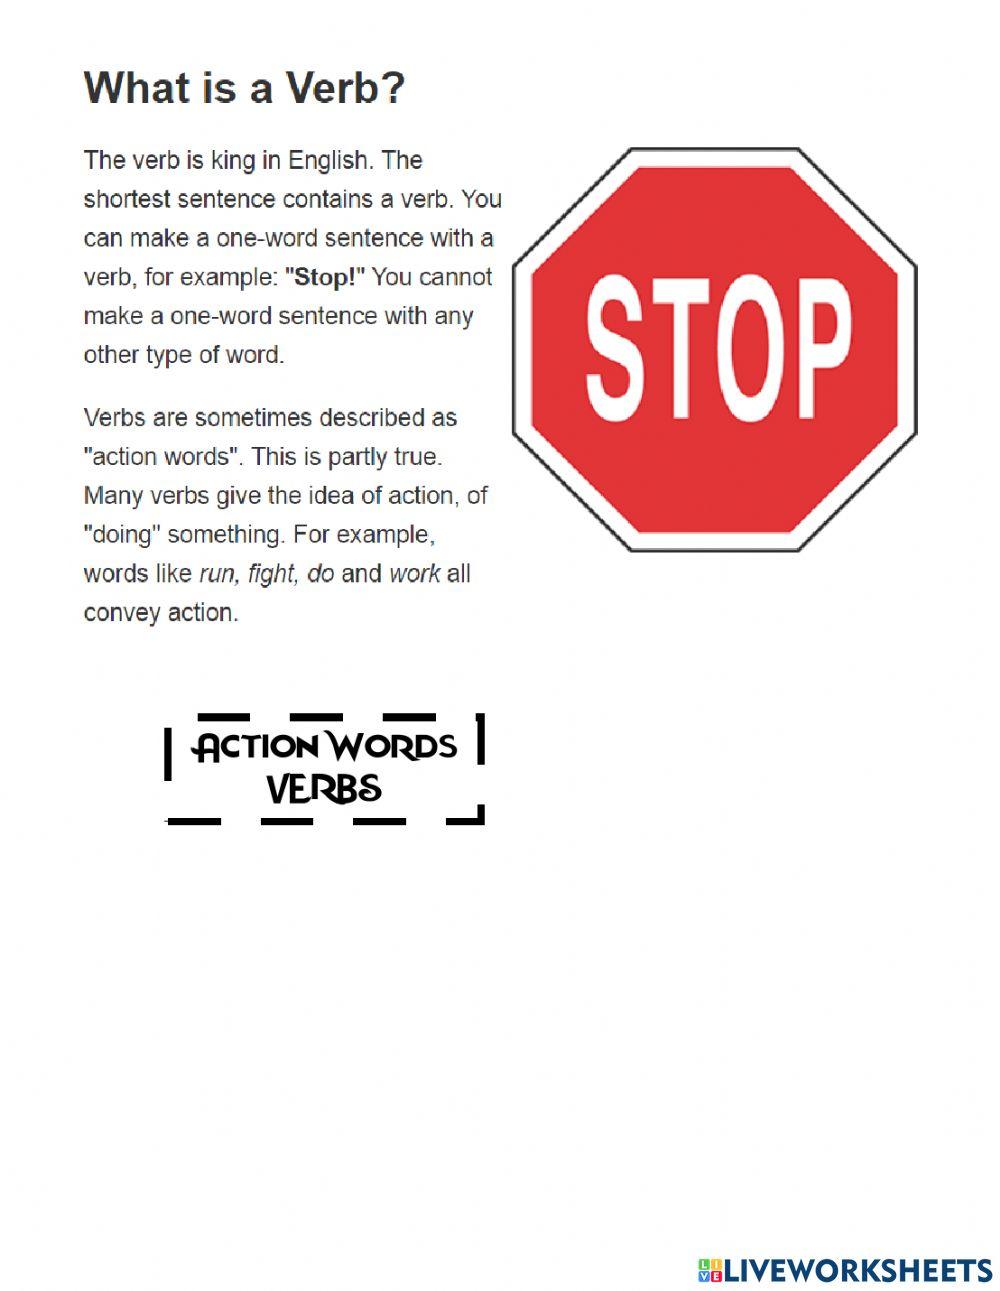 Definition of action words or verb.